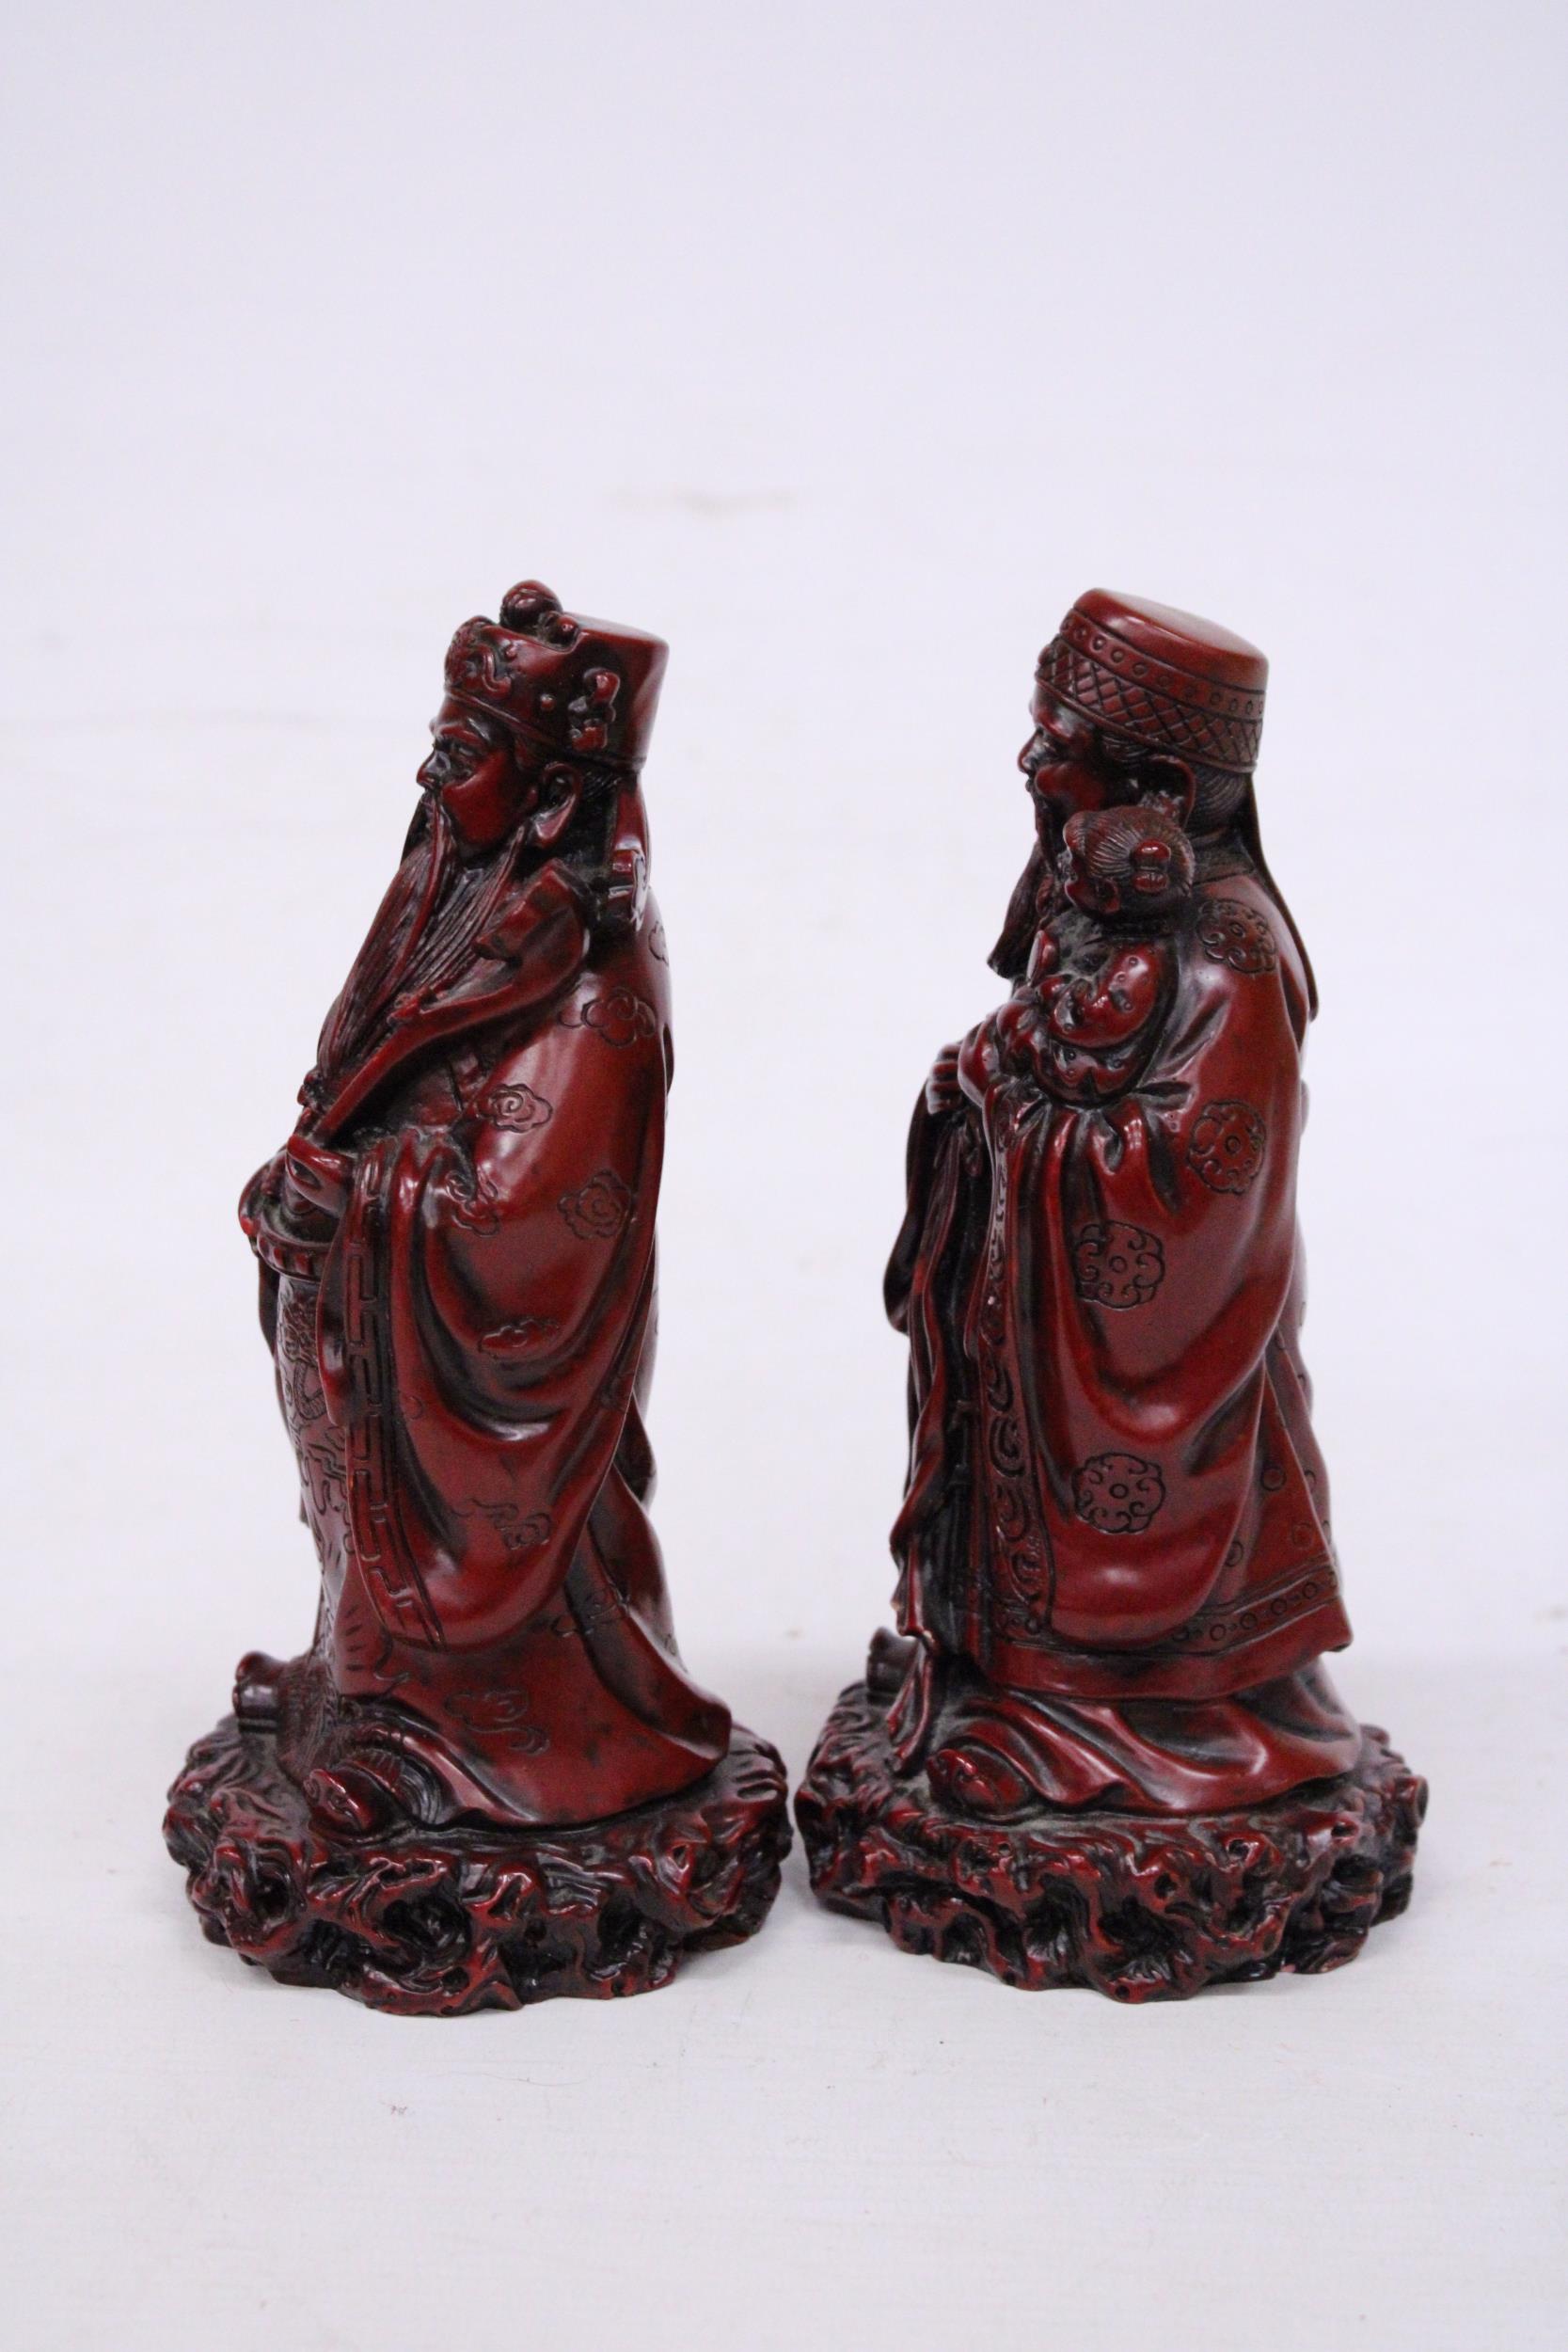 TWO HEAVY RED RESIN MANDARIN FIGURES 9 INCH (H) - Image 2 of 6